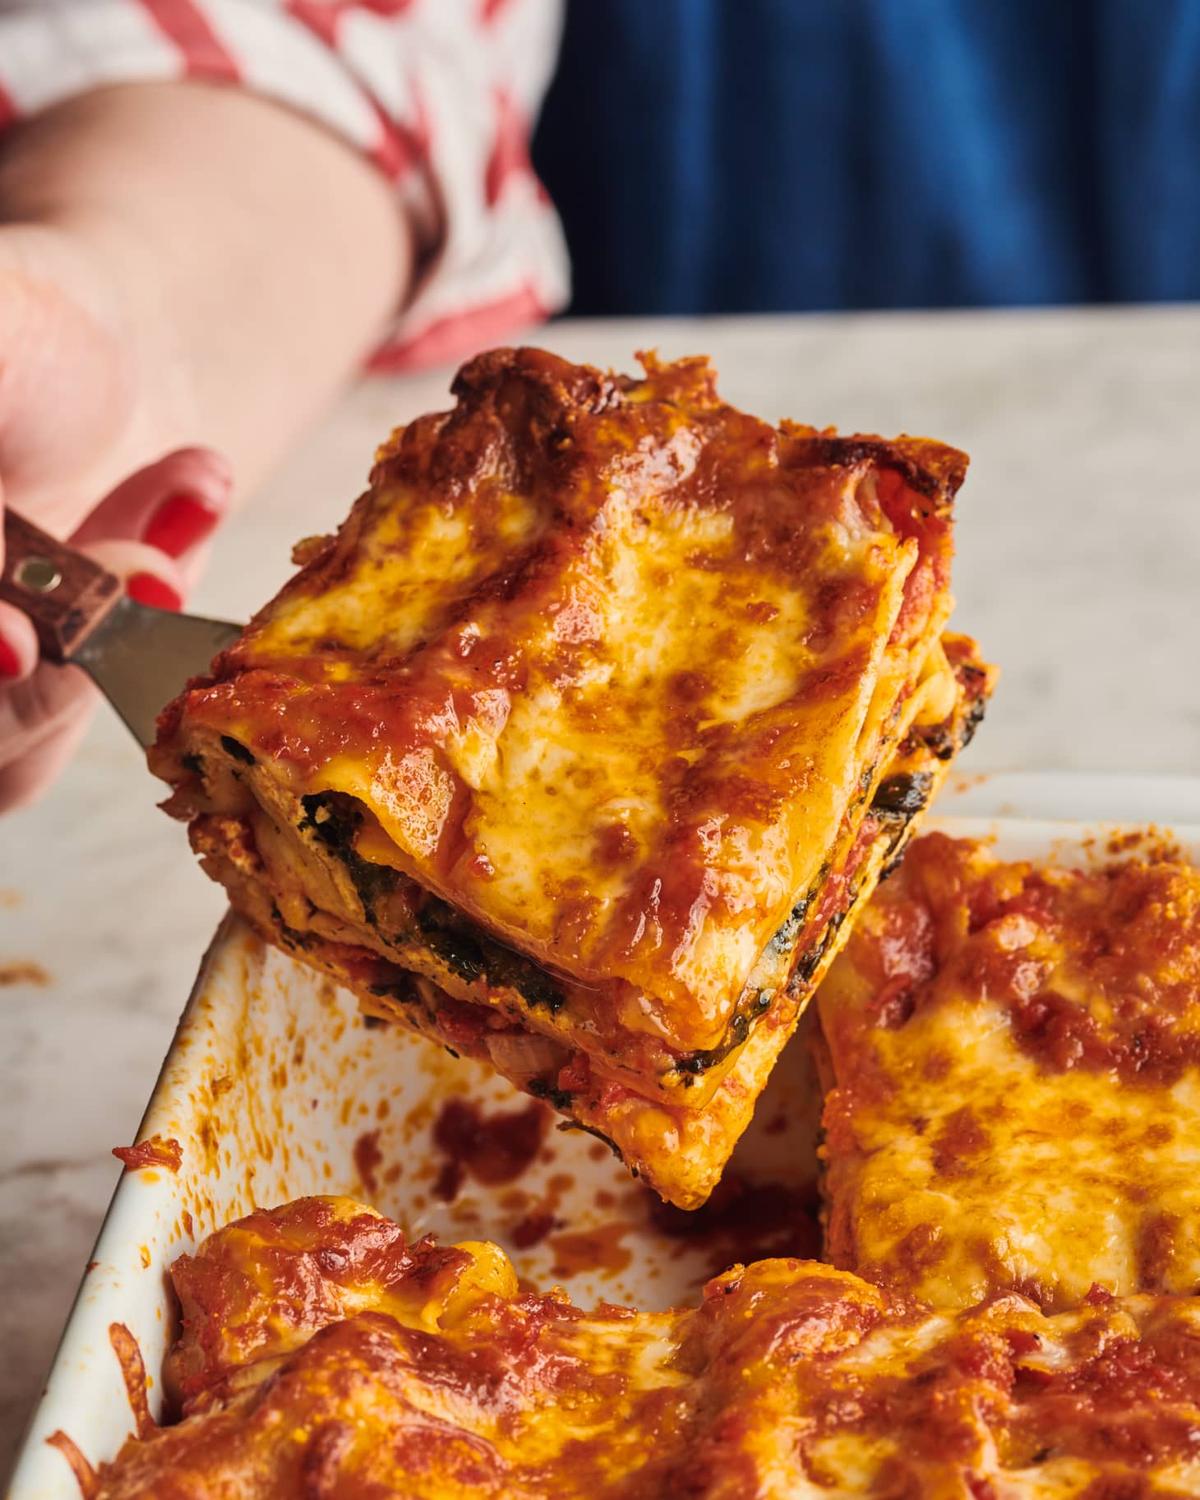 This lasagna doesn’t need much to turn it into a complete dinner. (Joe Lingeman/TNS)